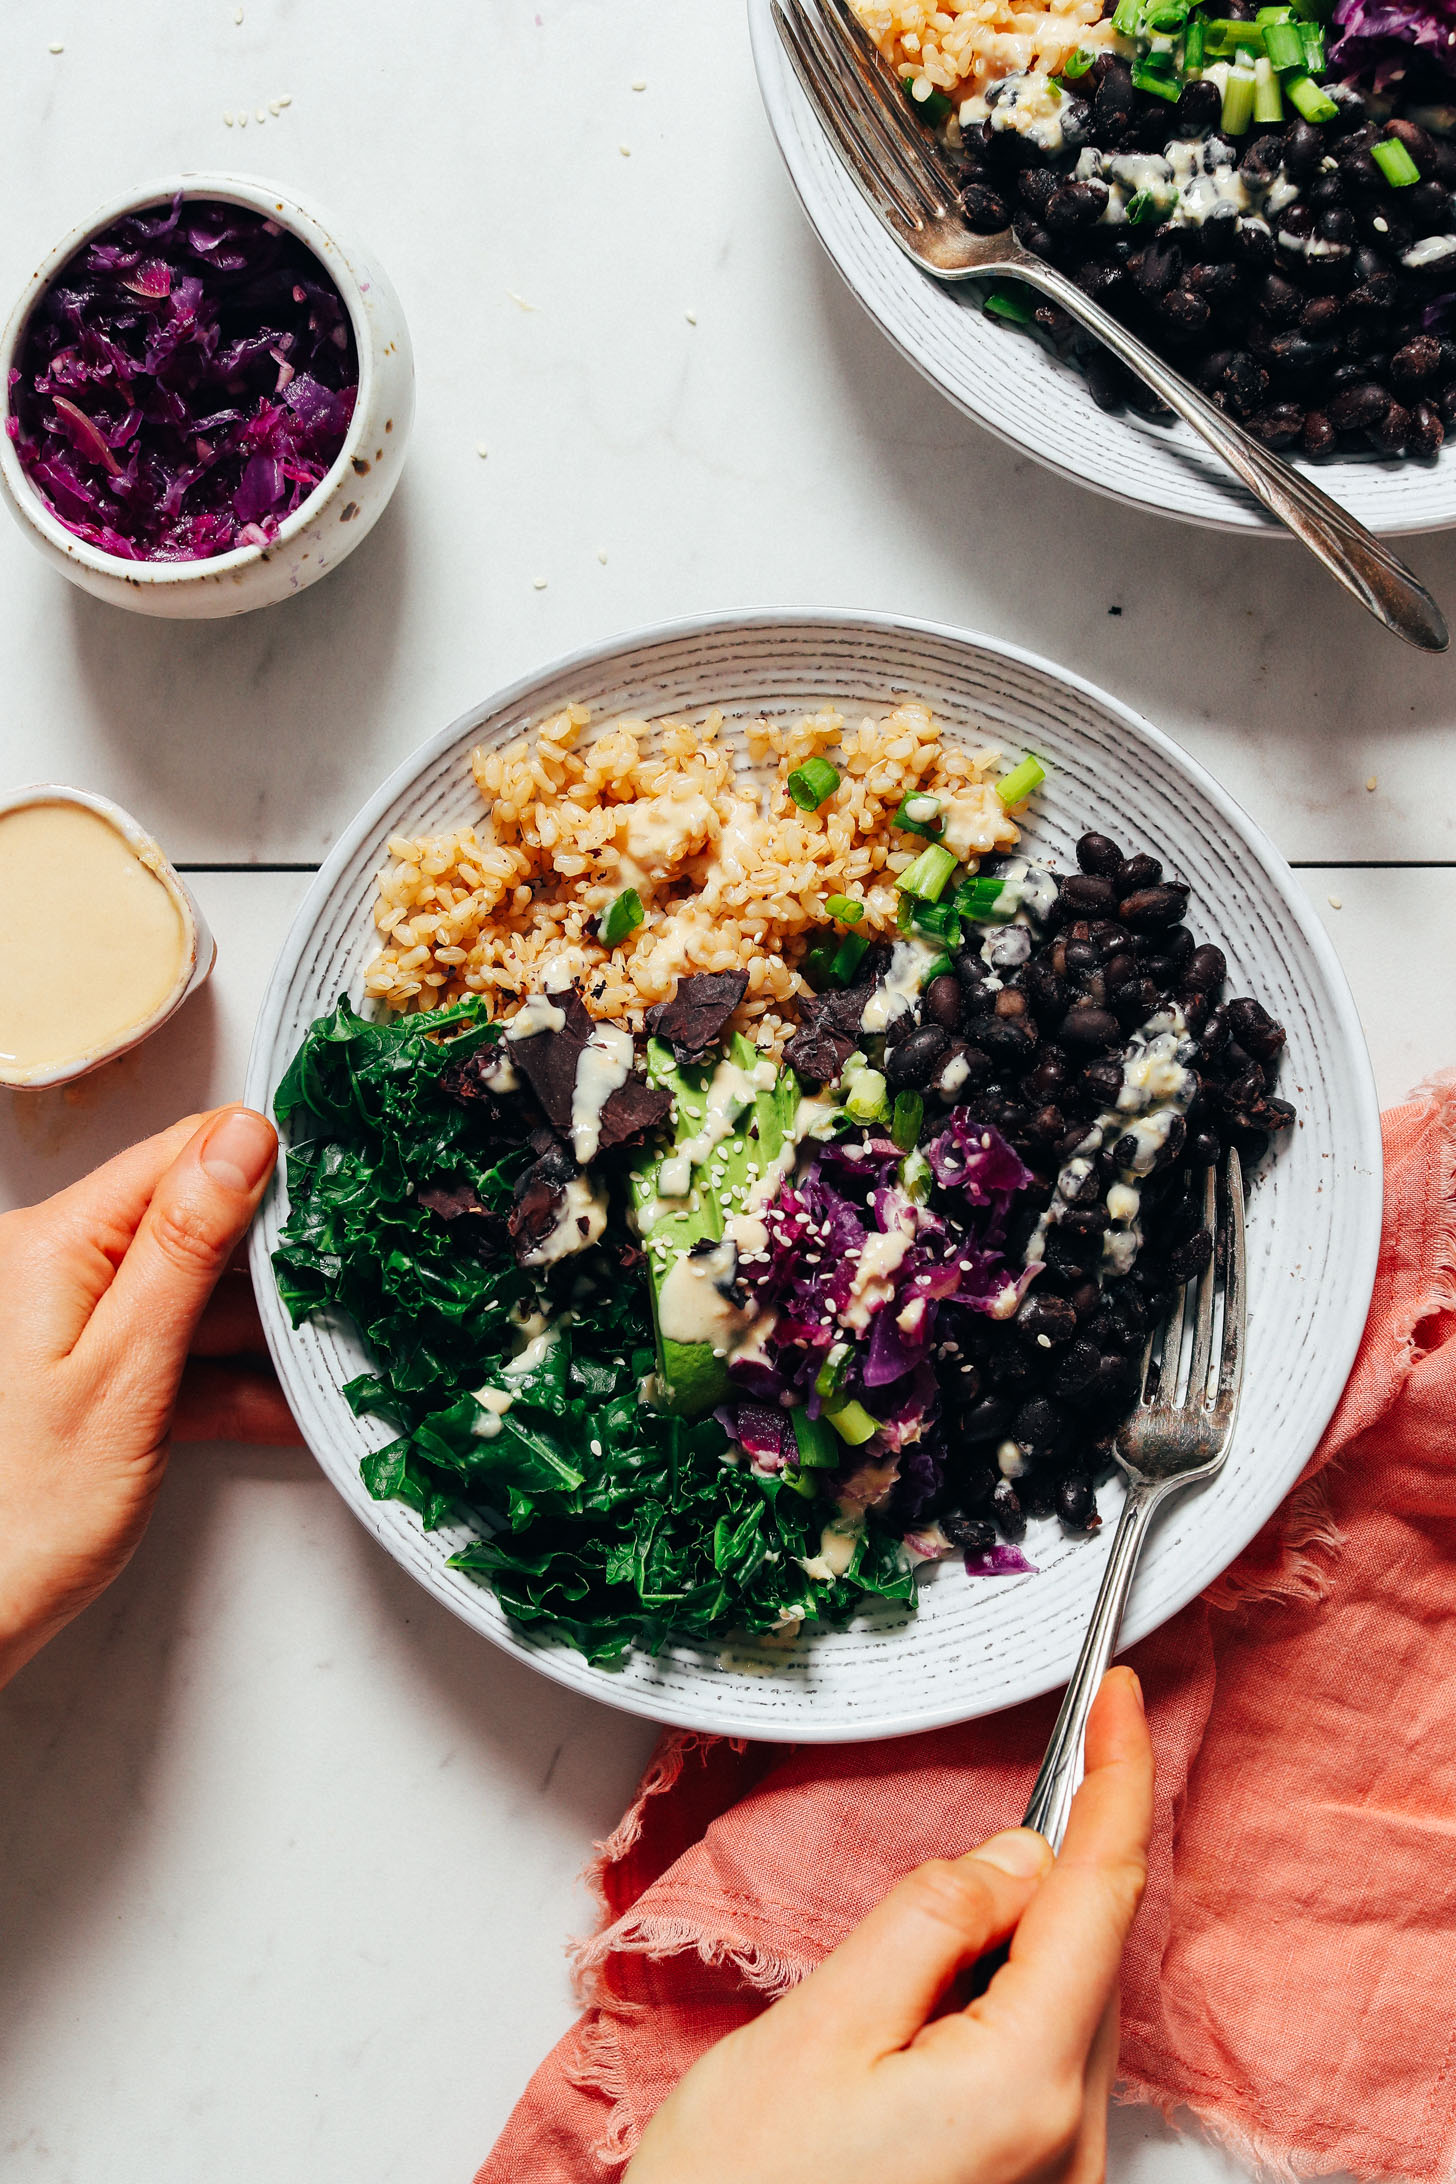 Fork in a Black Bean Buddha Bowl made with beans, rice, kale, avocado, kraut, and sauce